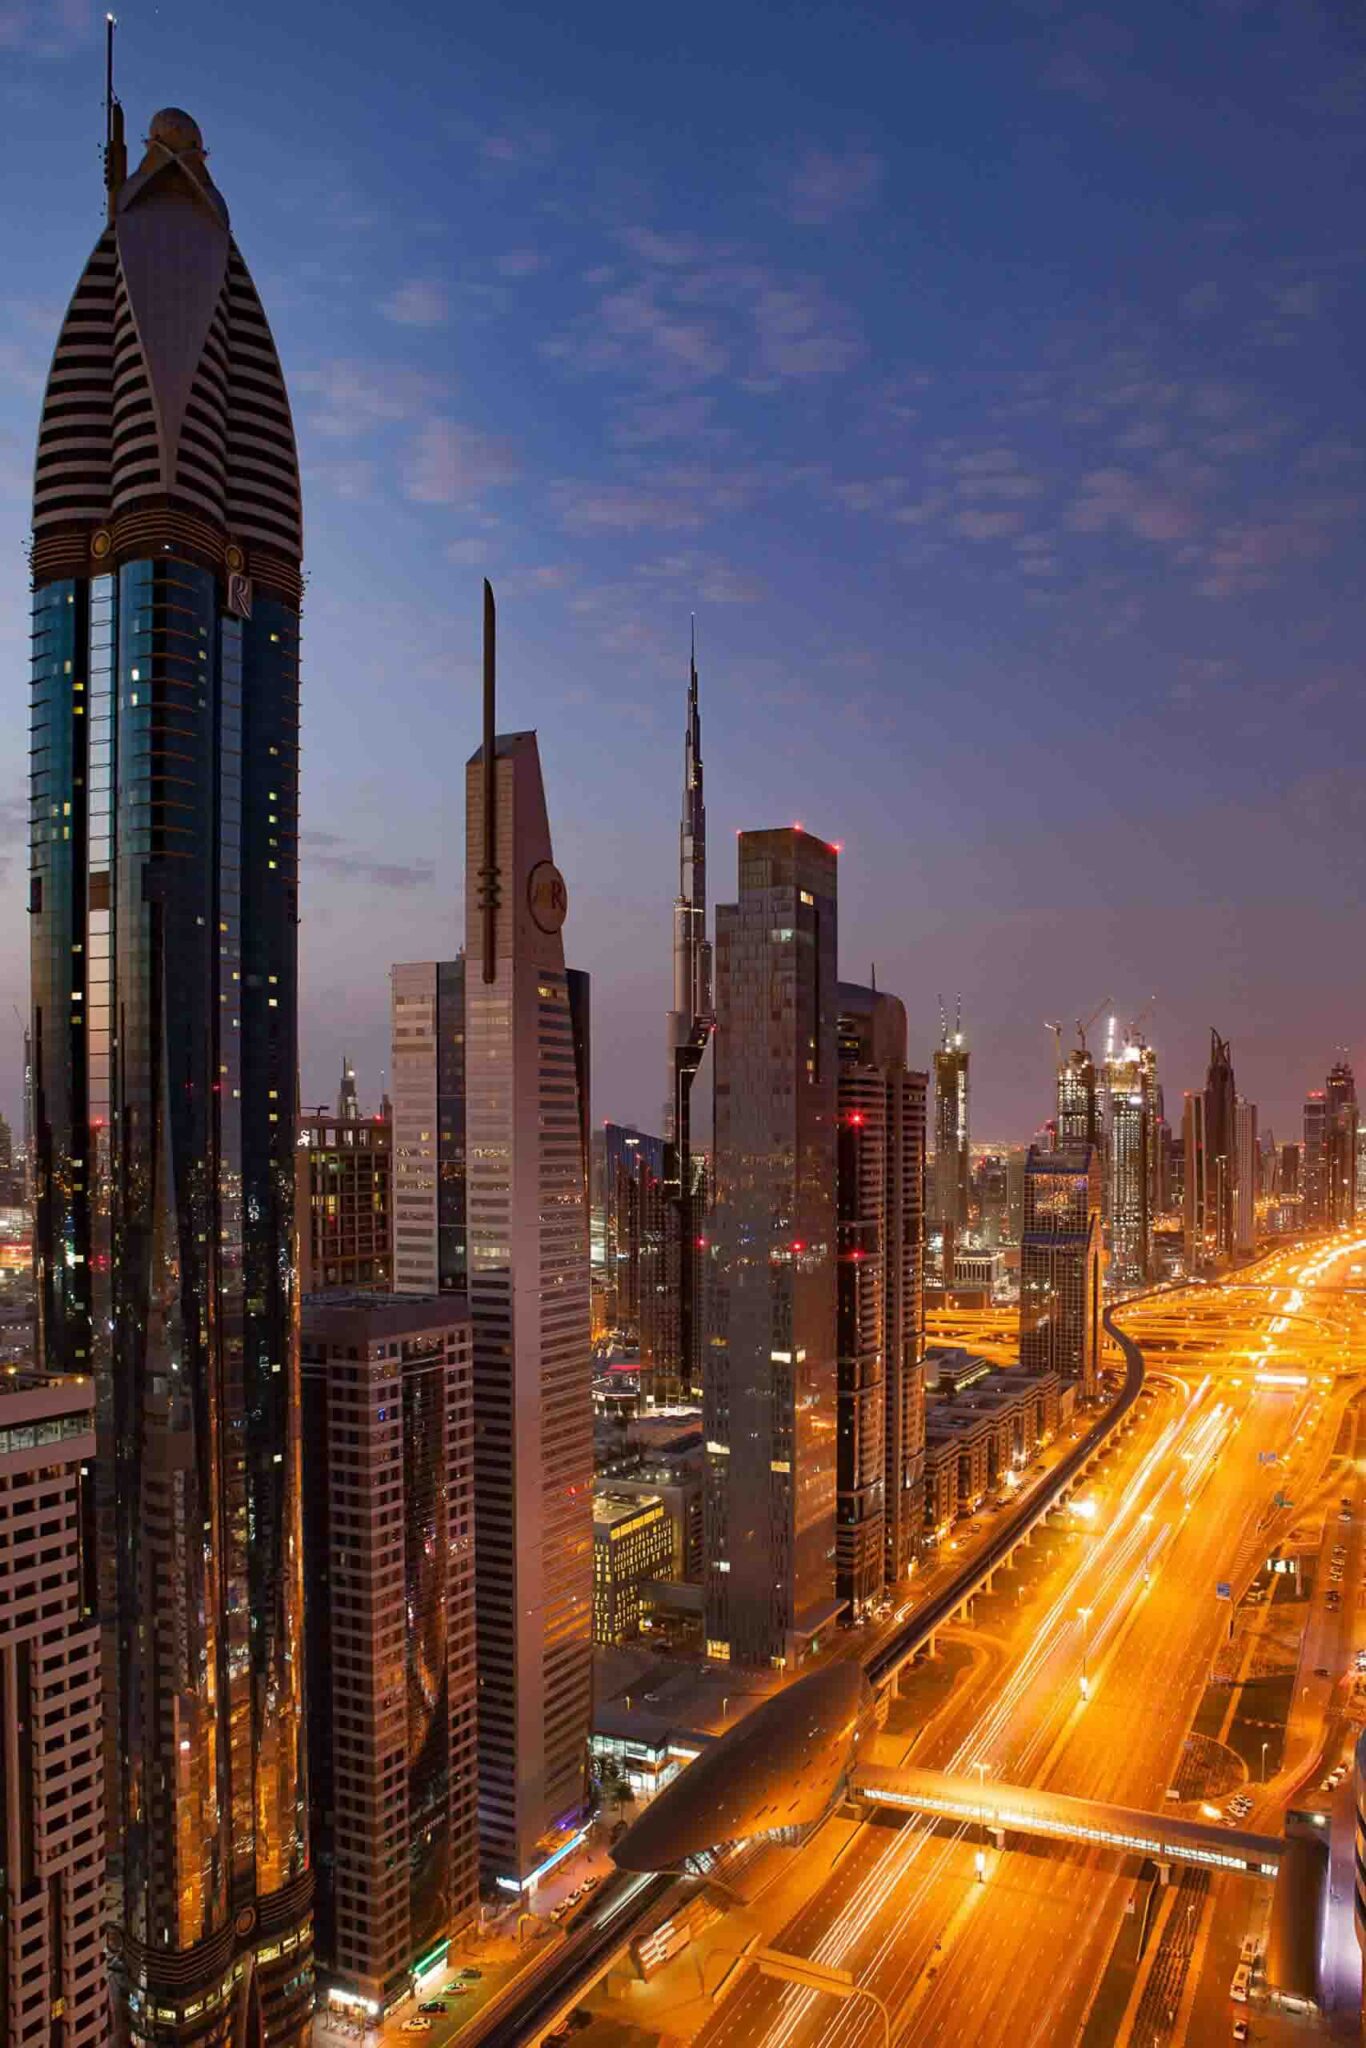 Golden Visa Dubai For a Long-Term Stay in the UAE